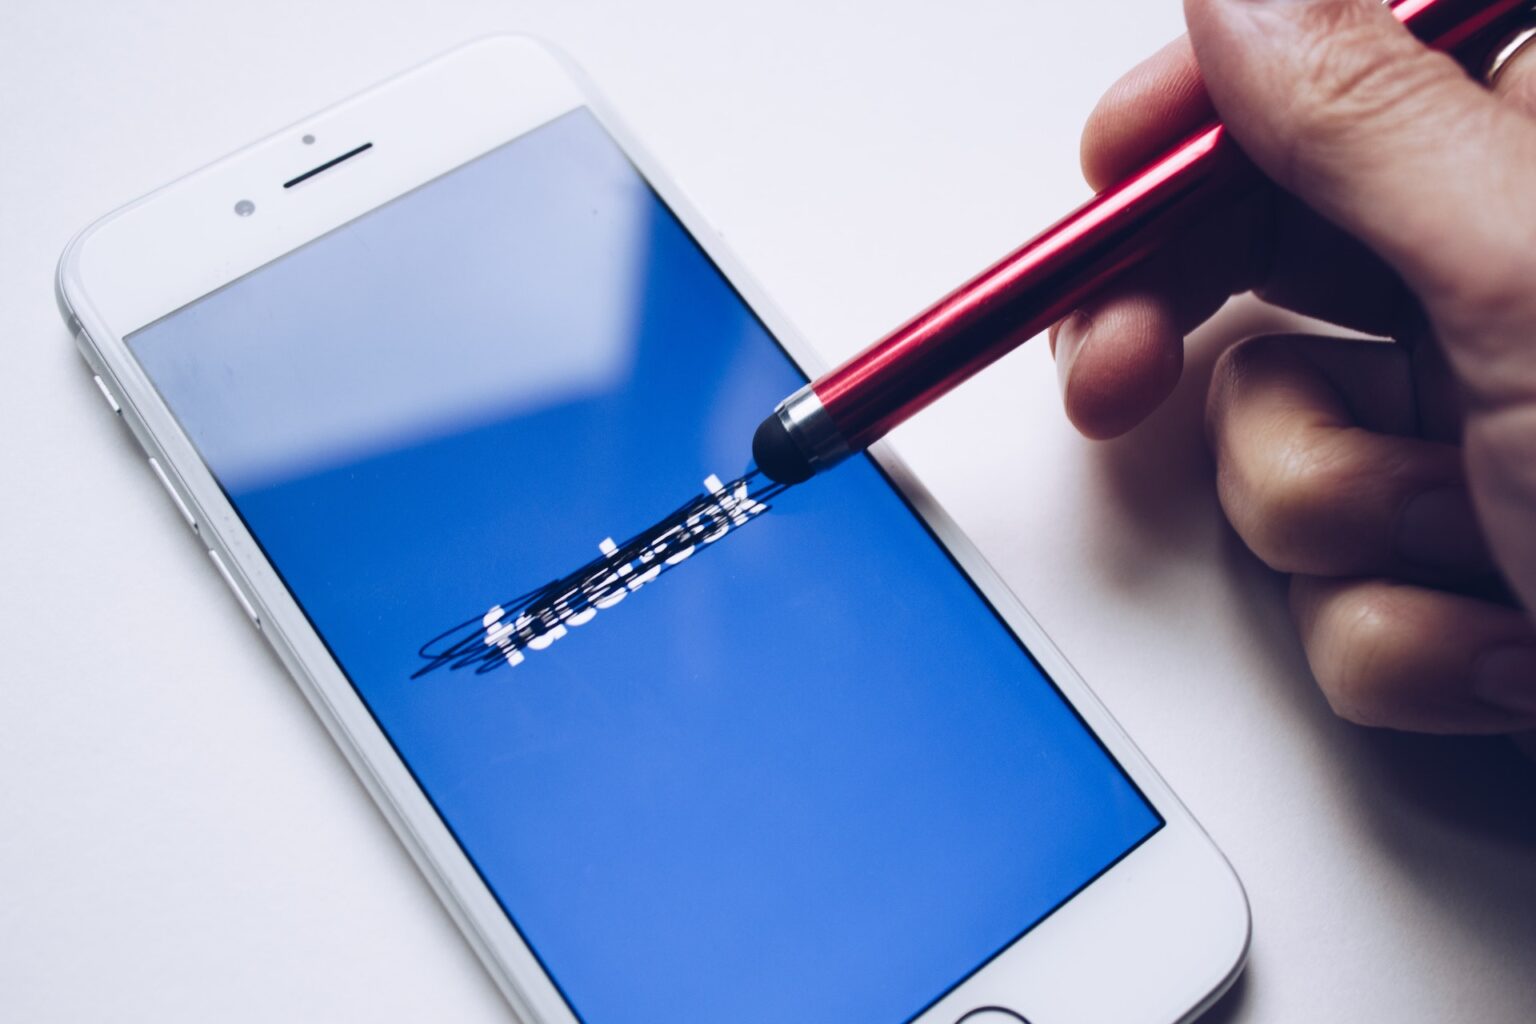 crossing out the Facebook logo on a phone with a stylus